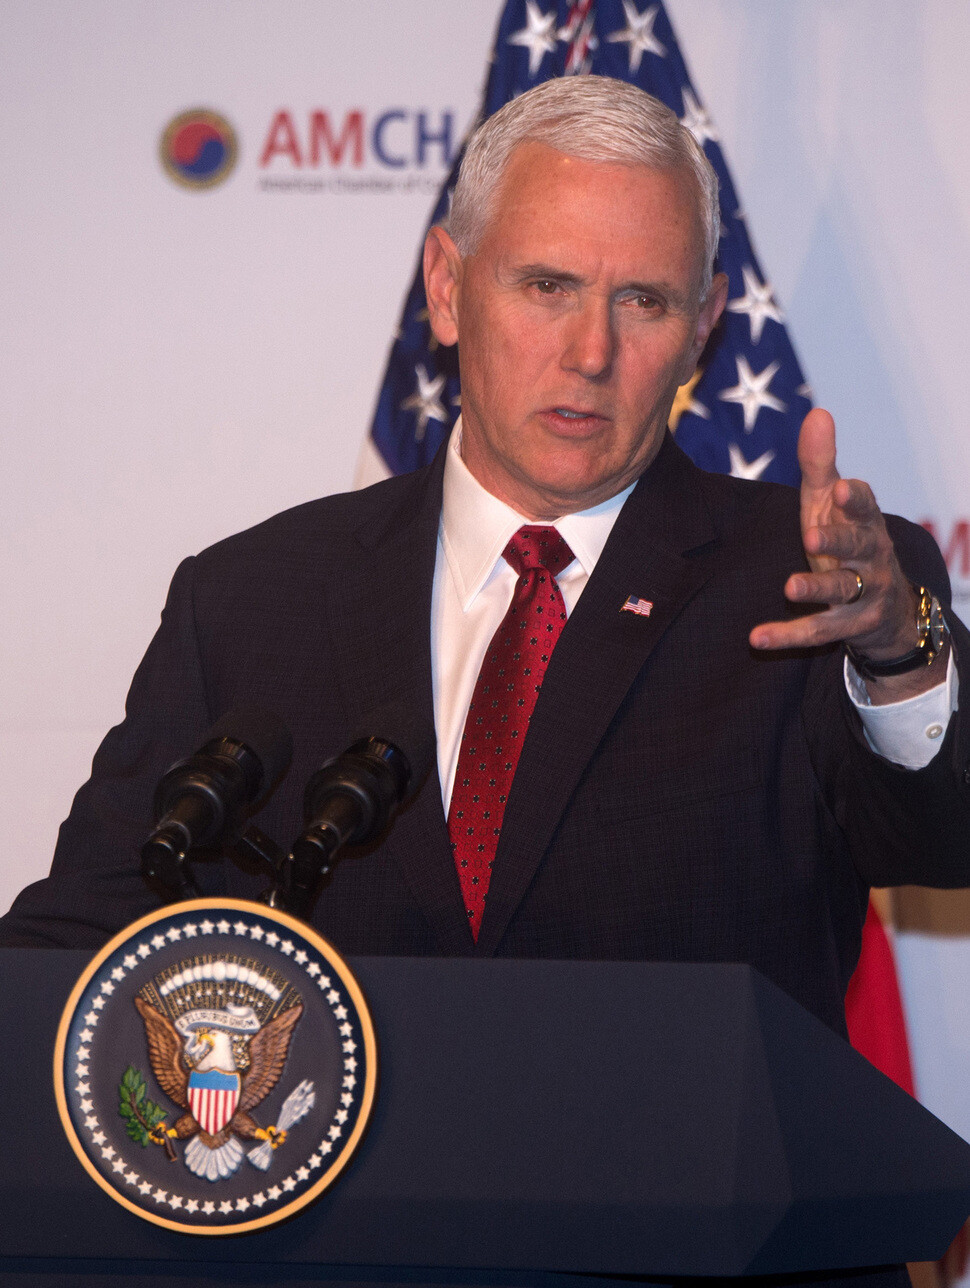 US Vice President Mike Pence speaks before the American Chamber of Commerce in Korea